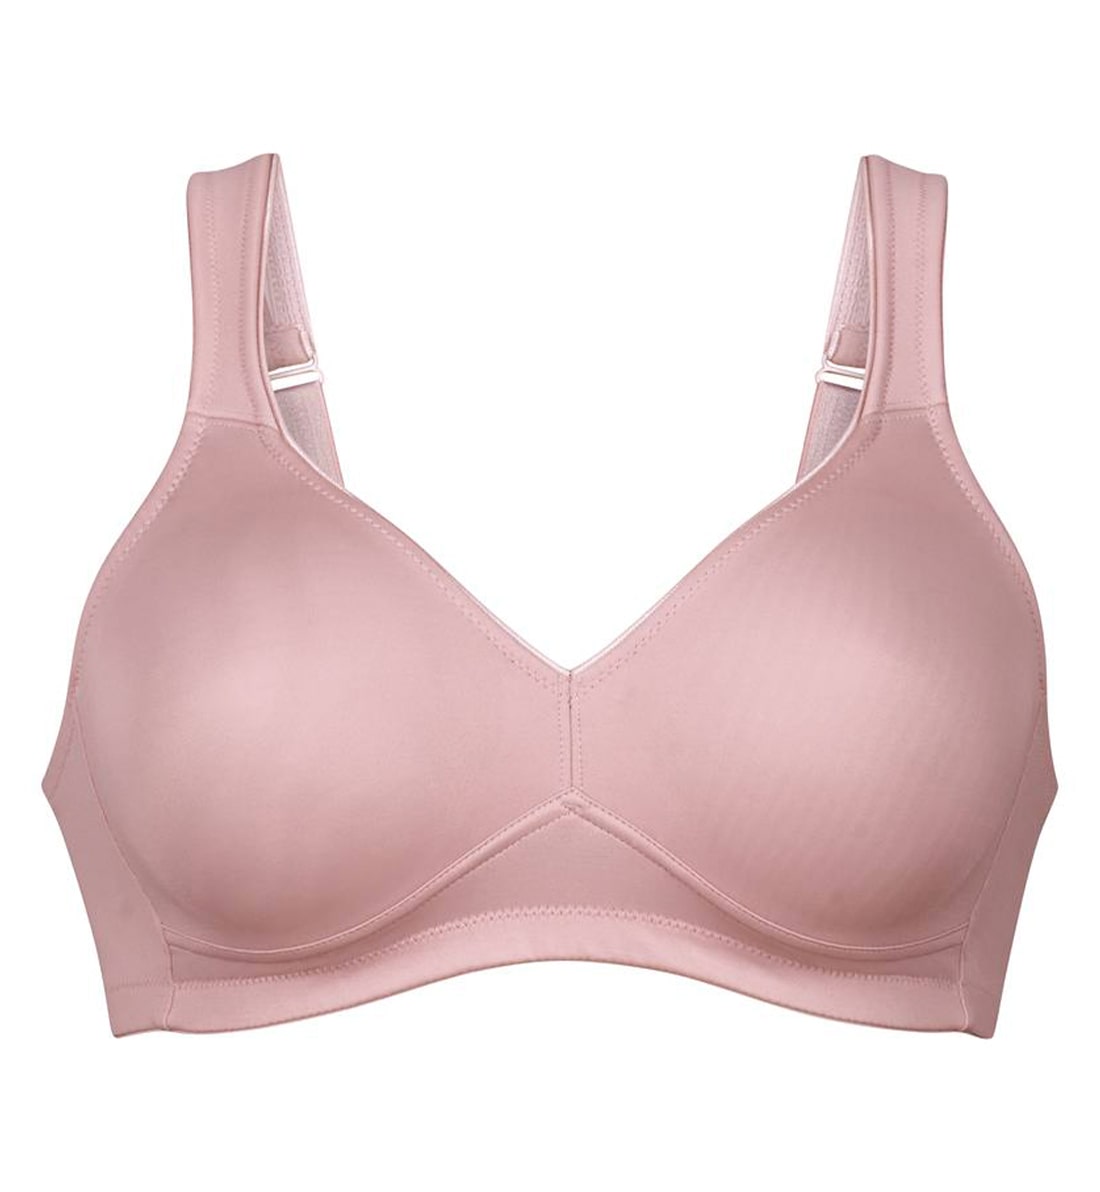 CINSTRON Wireless Bras with Support and Lift - ShopStyle